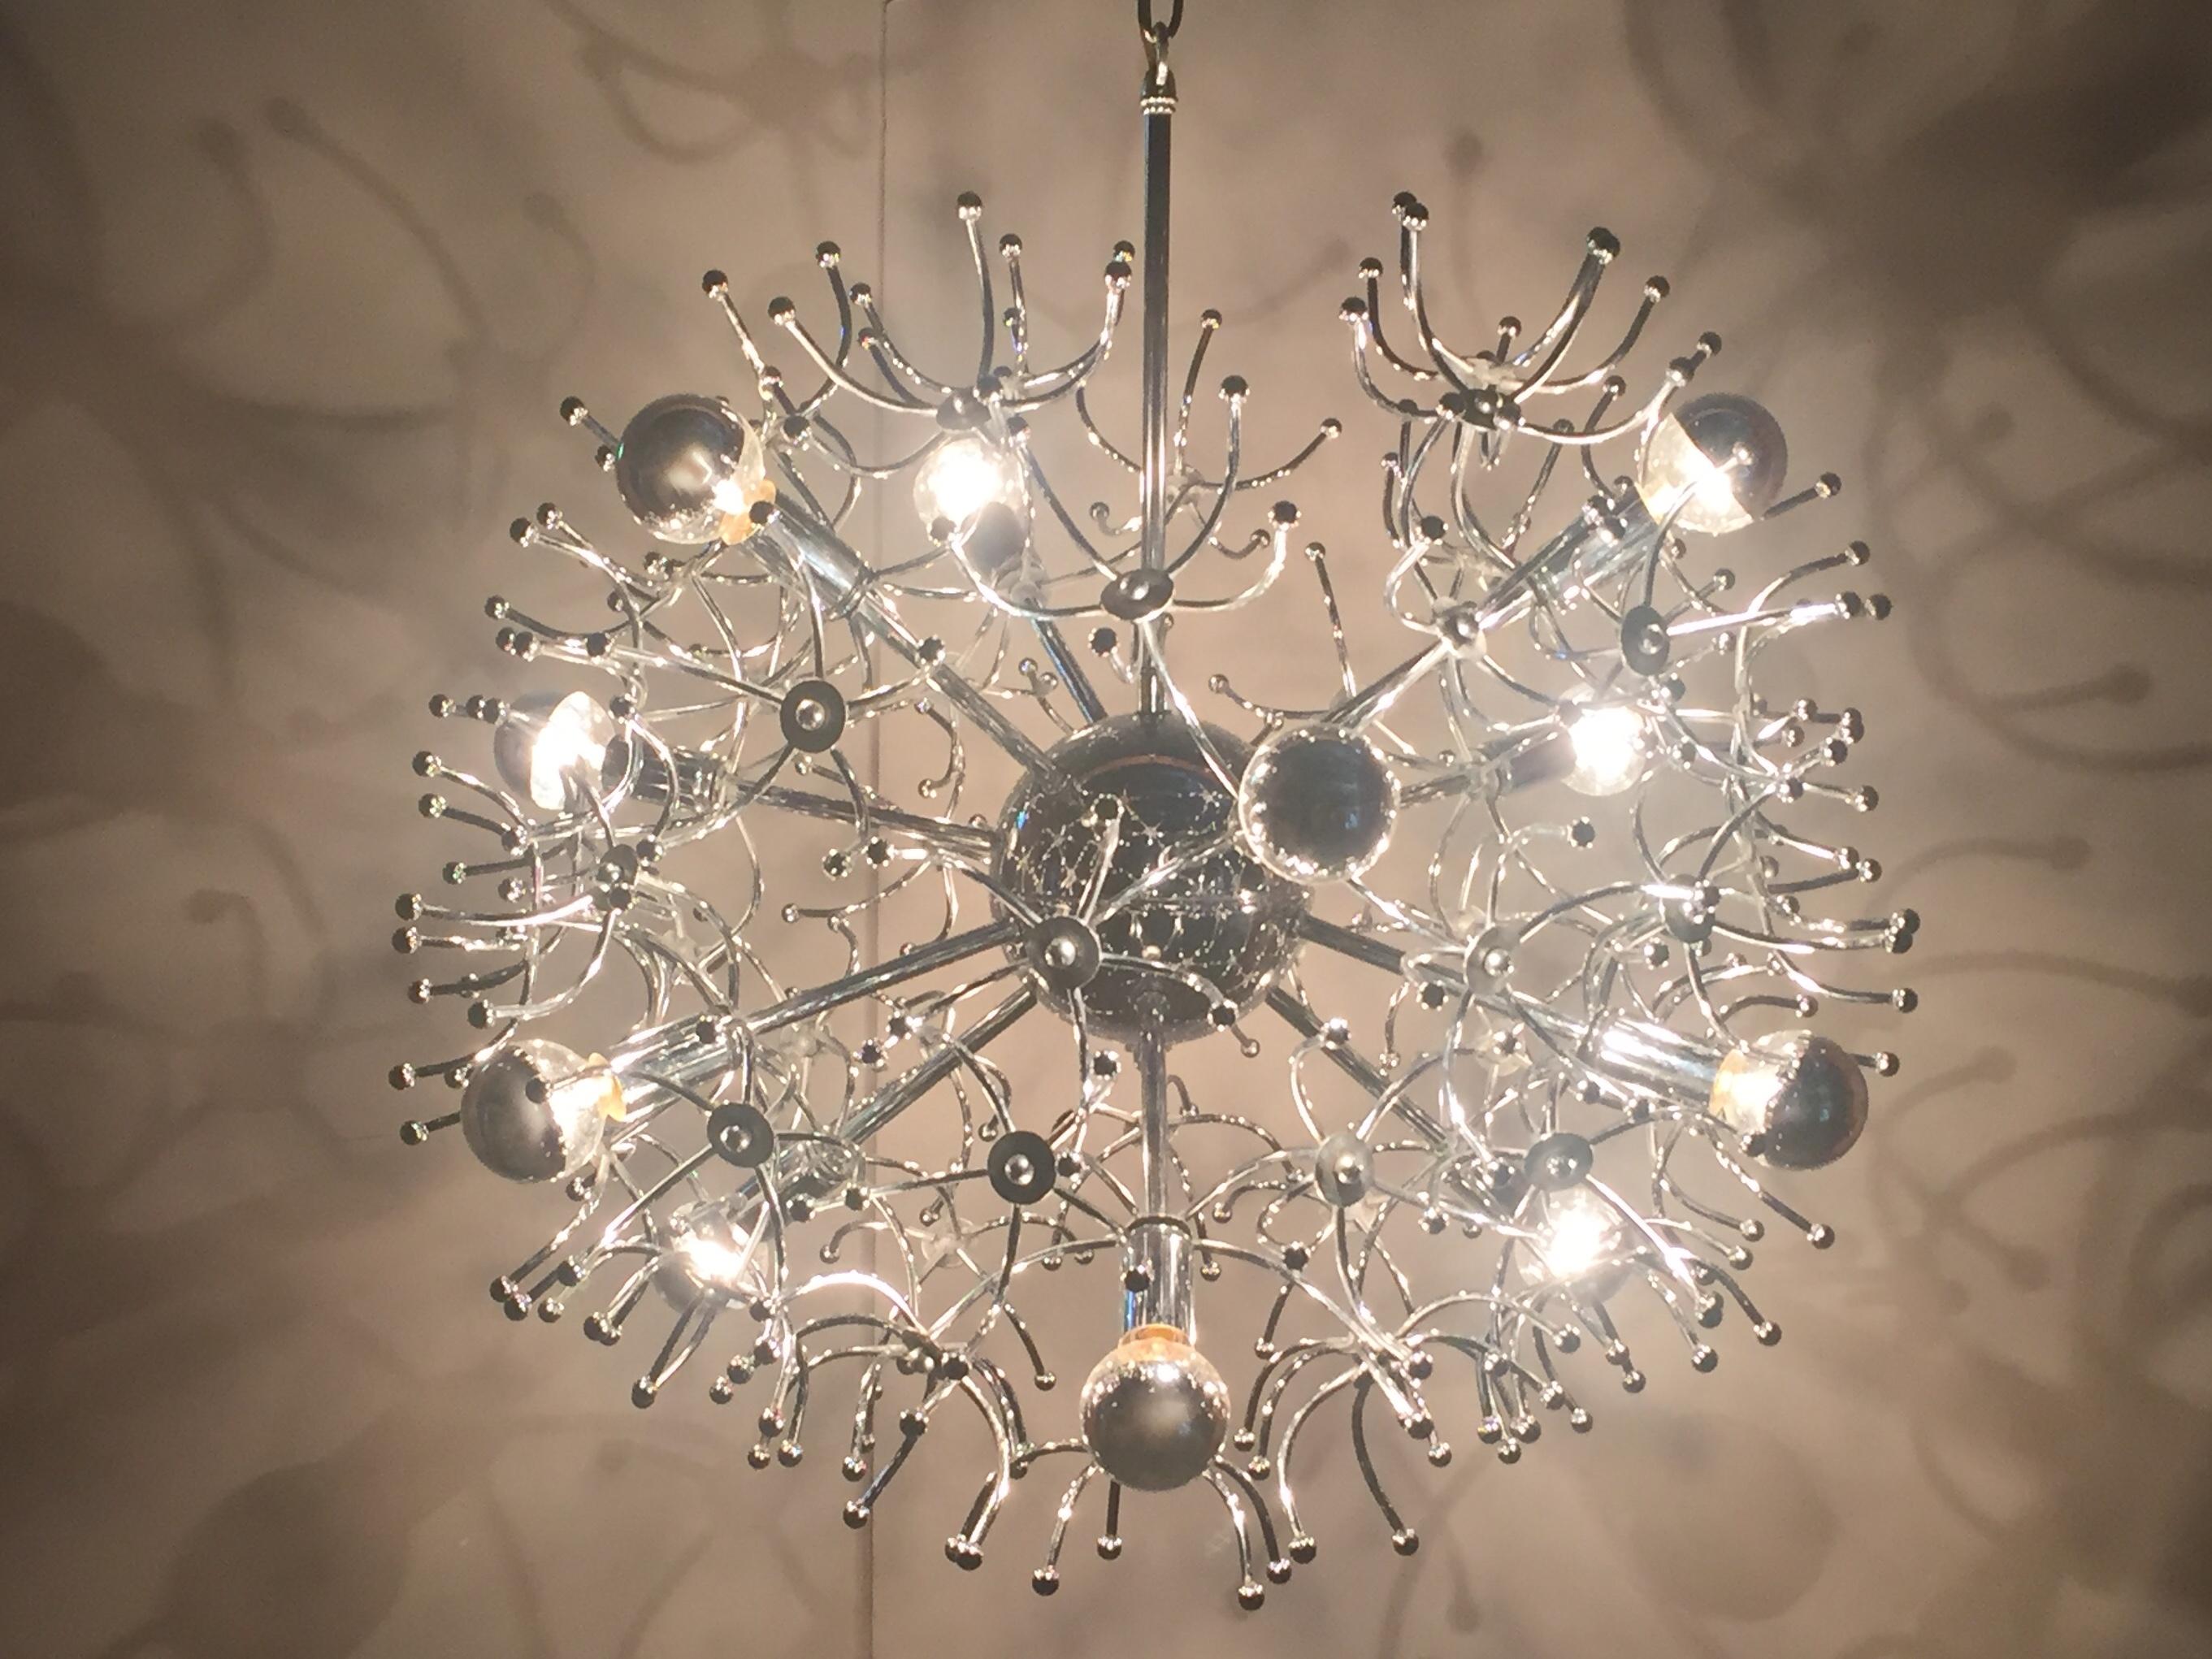 A round multi arm 12 bulb glistening chrome Sputnik chandelier with dozens of decorative tendrils that make this vintage fixture look like an amazing underwater creature.
Bottom of fixture to top of chrome rod is 25 inches, extra chain is included